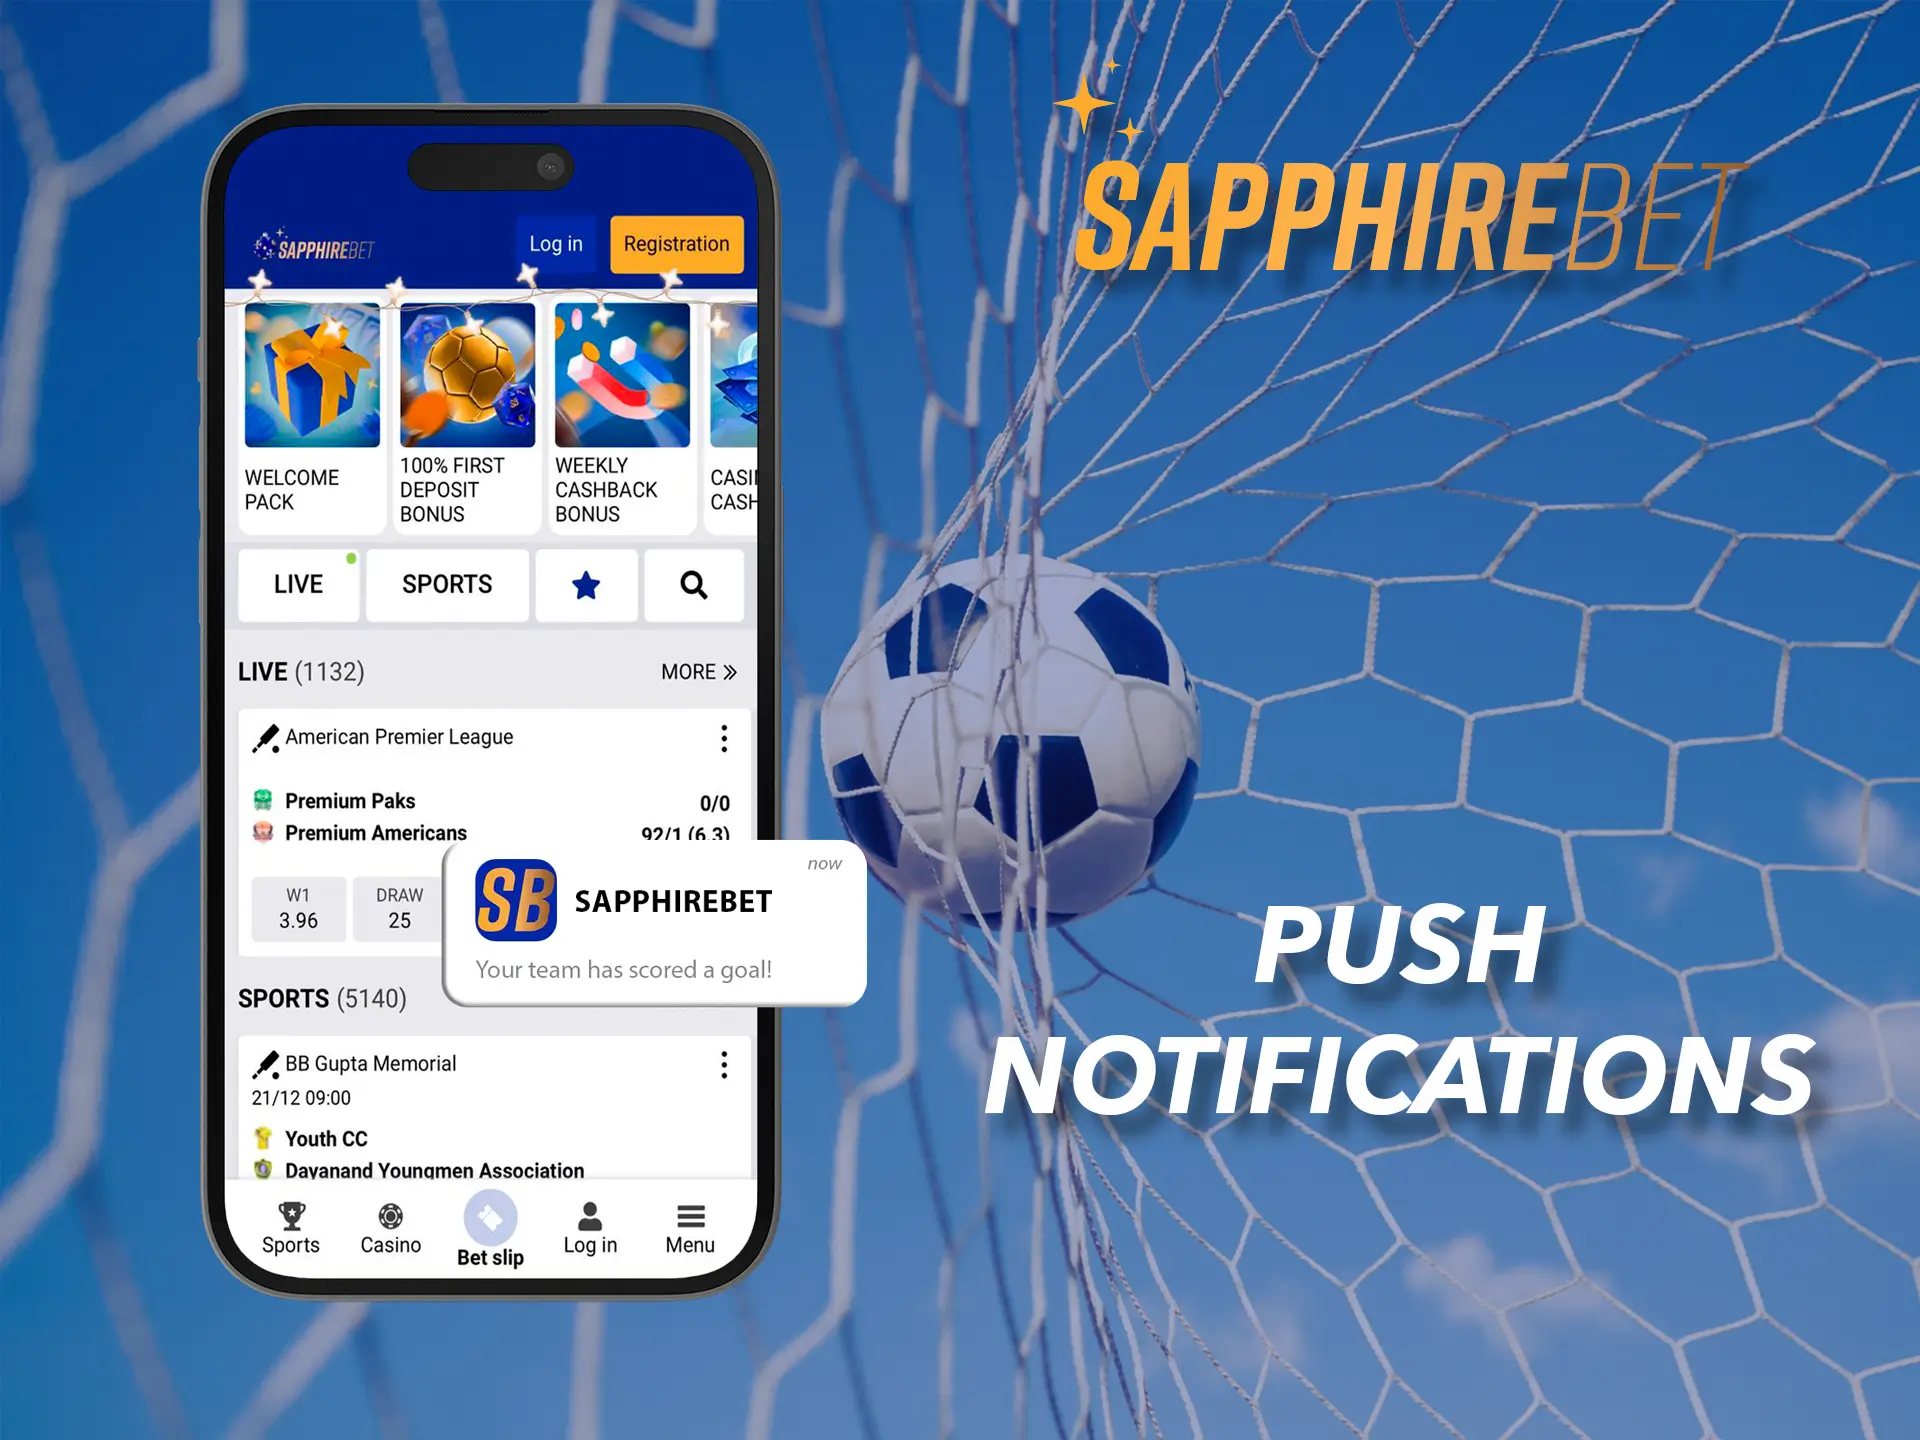 Receive notifications from Sapphirebet to your device when your team performs well.